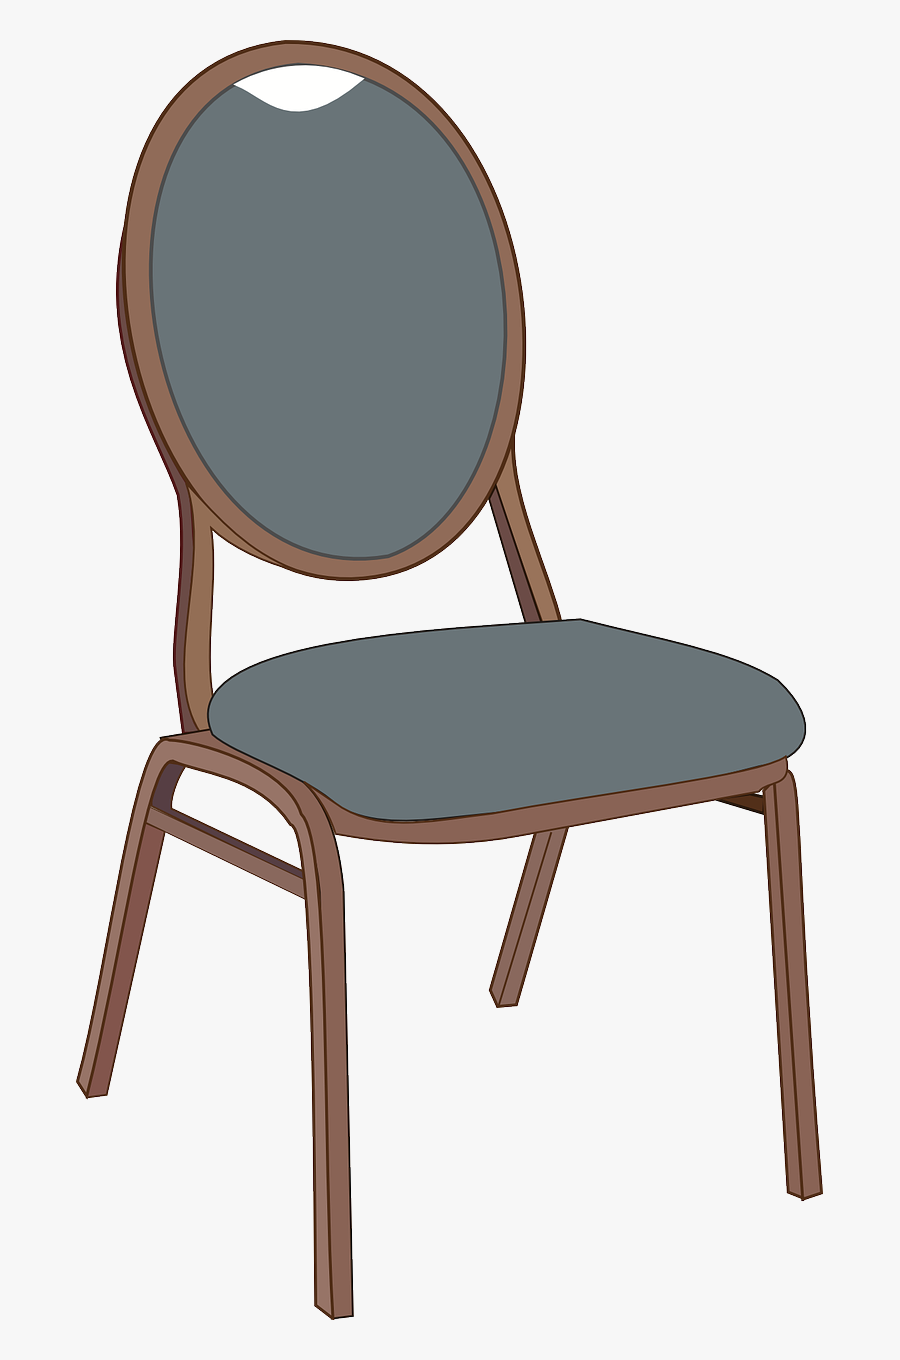 Conference Room Chairs, Transparent Clipart